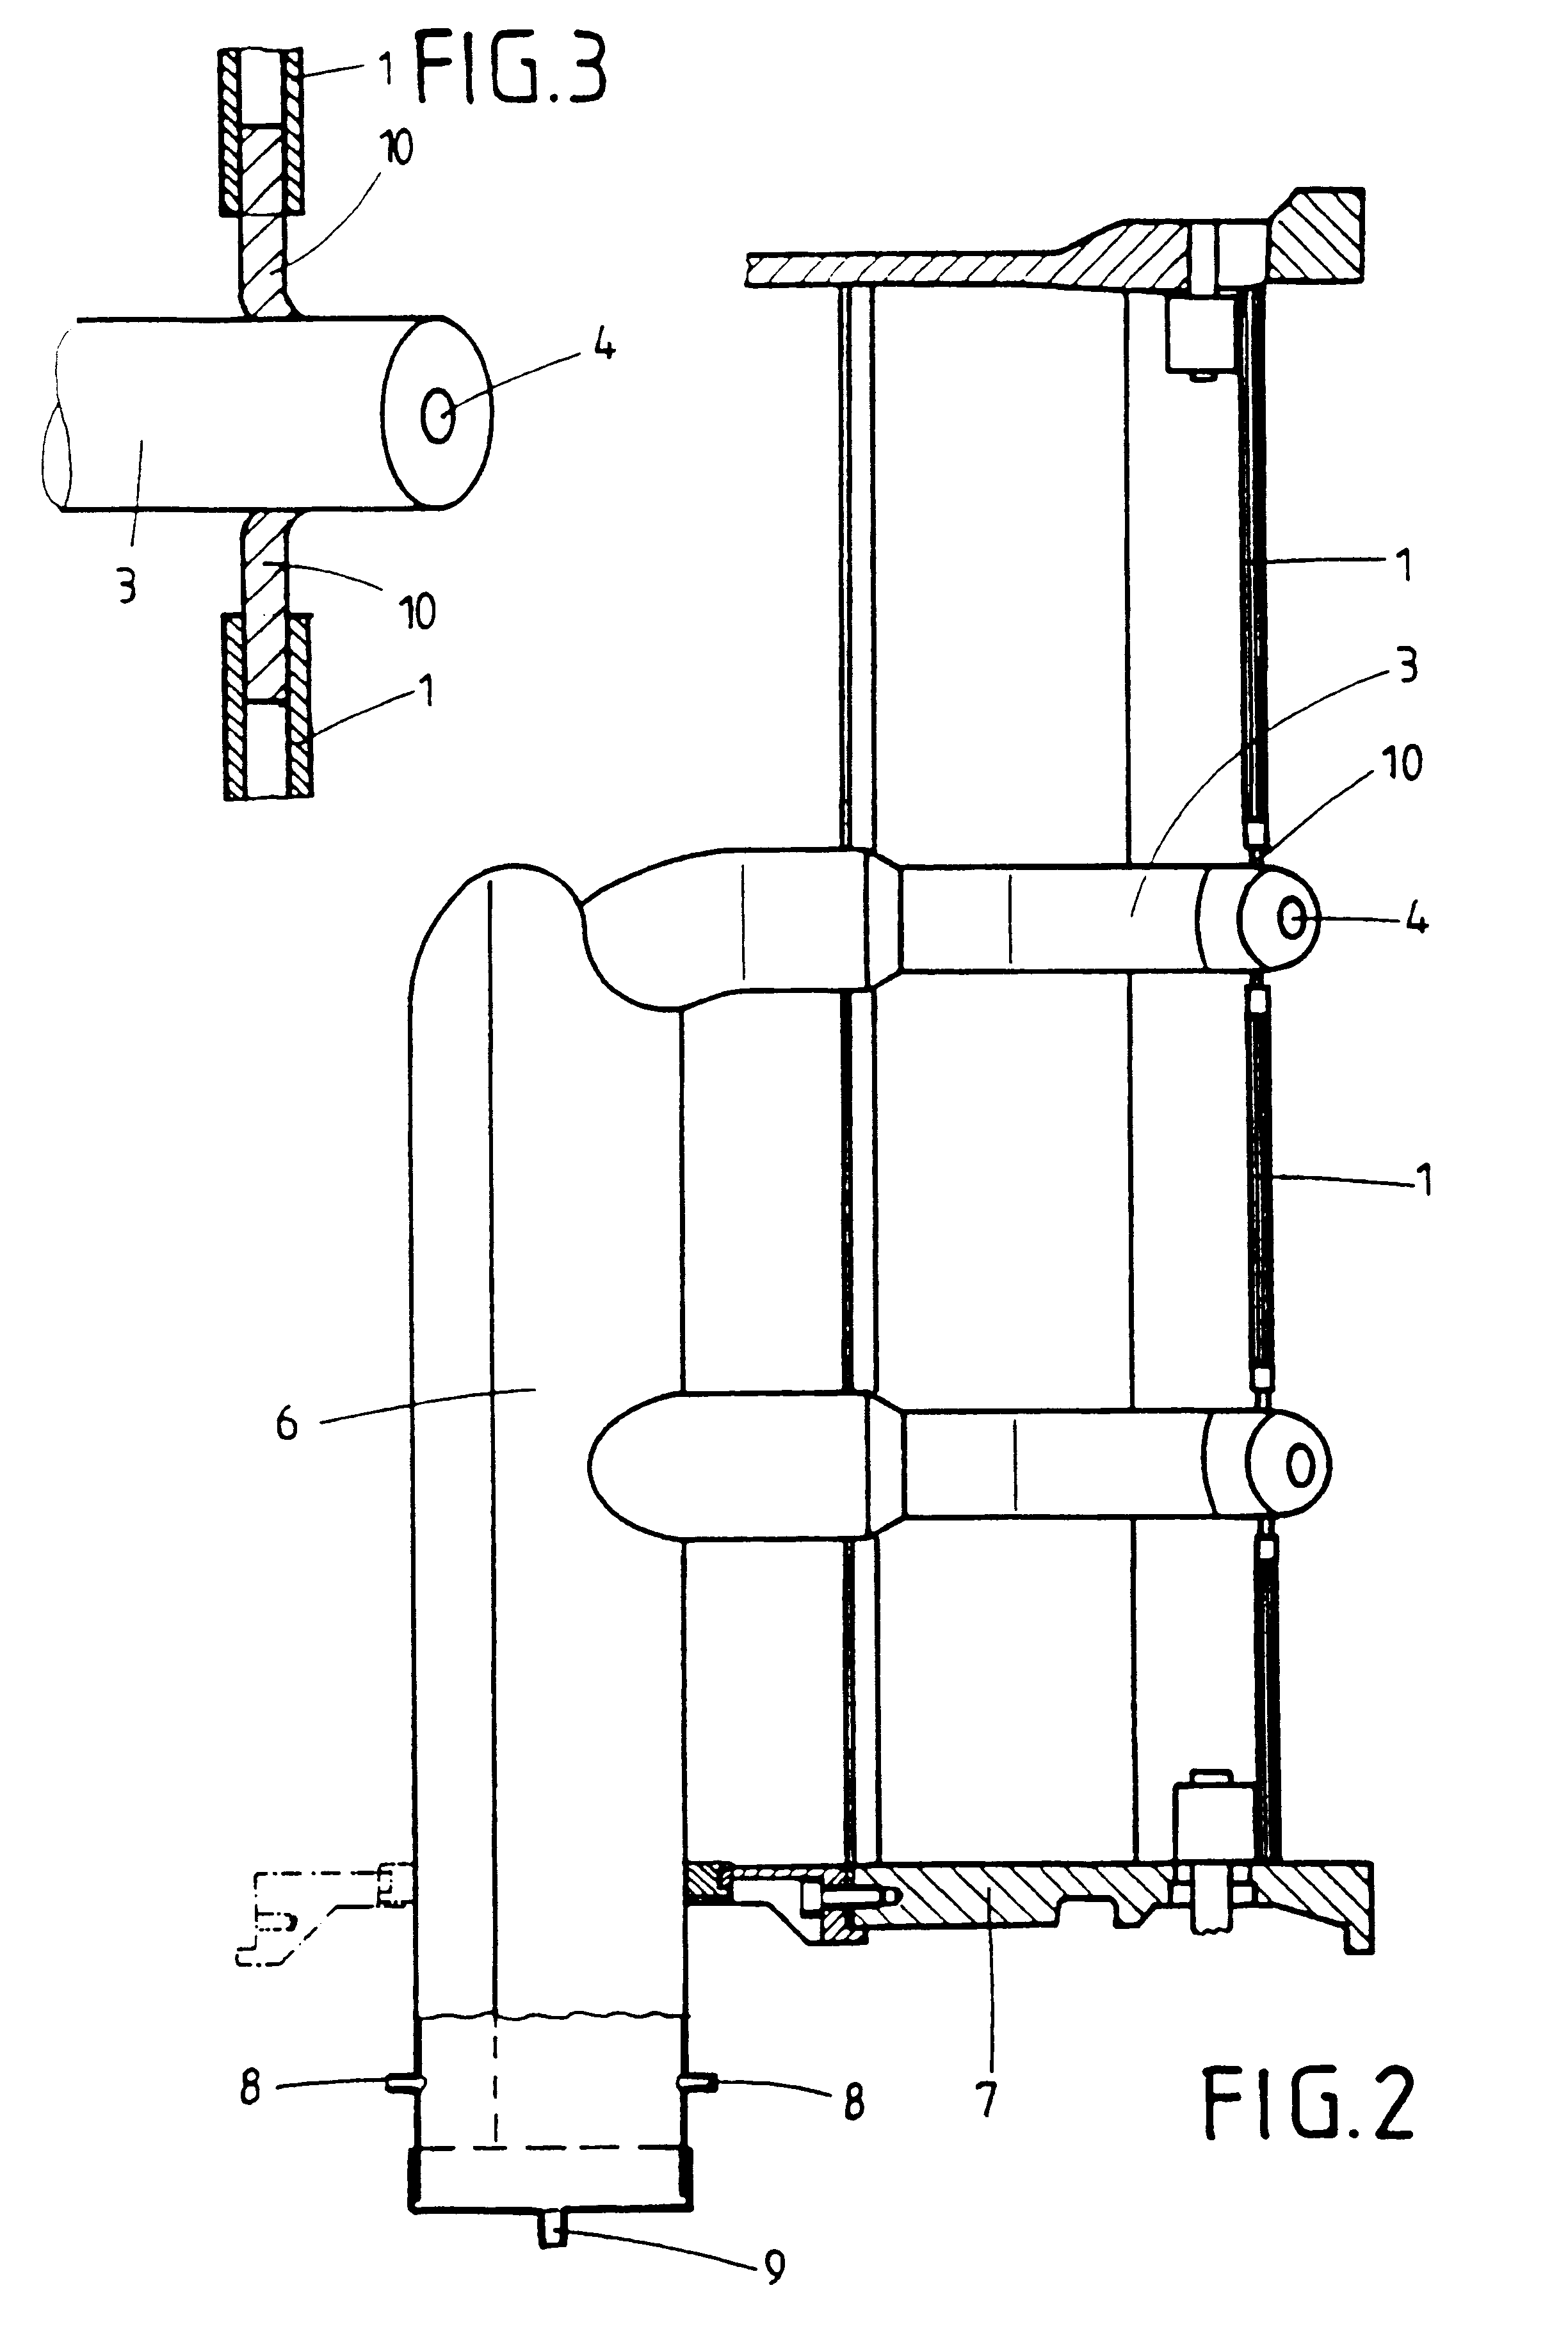 Fluidized bed apparatus having spray chamber with pivotal slats